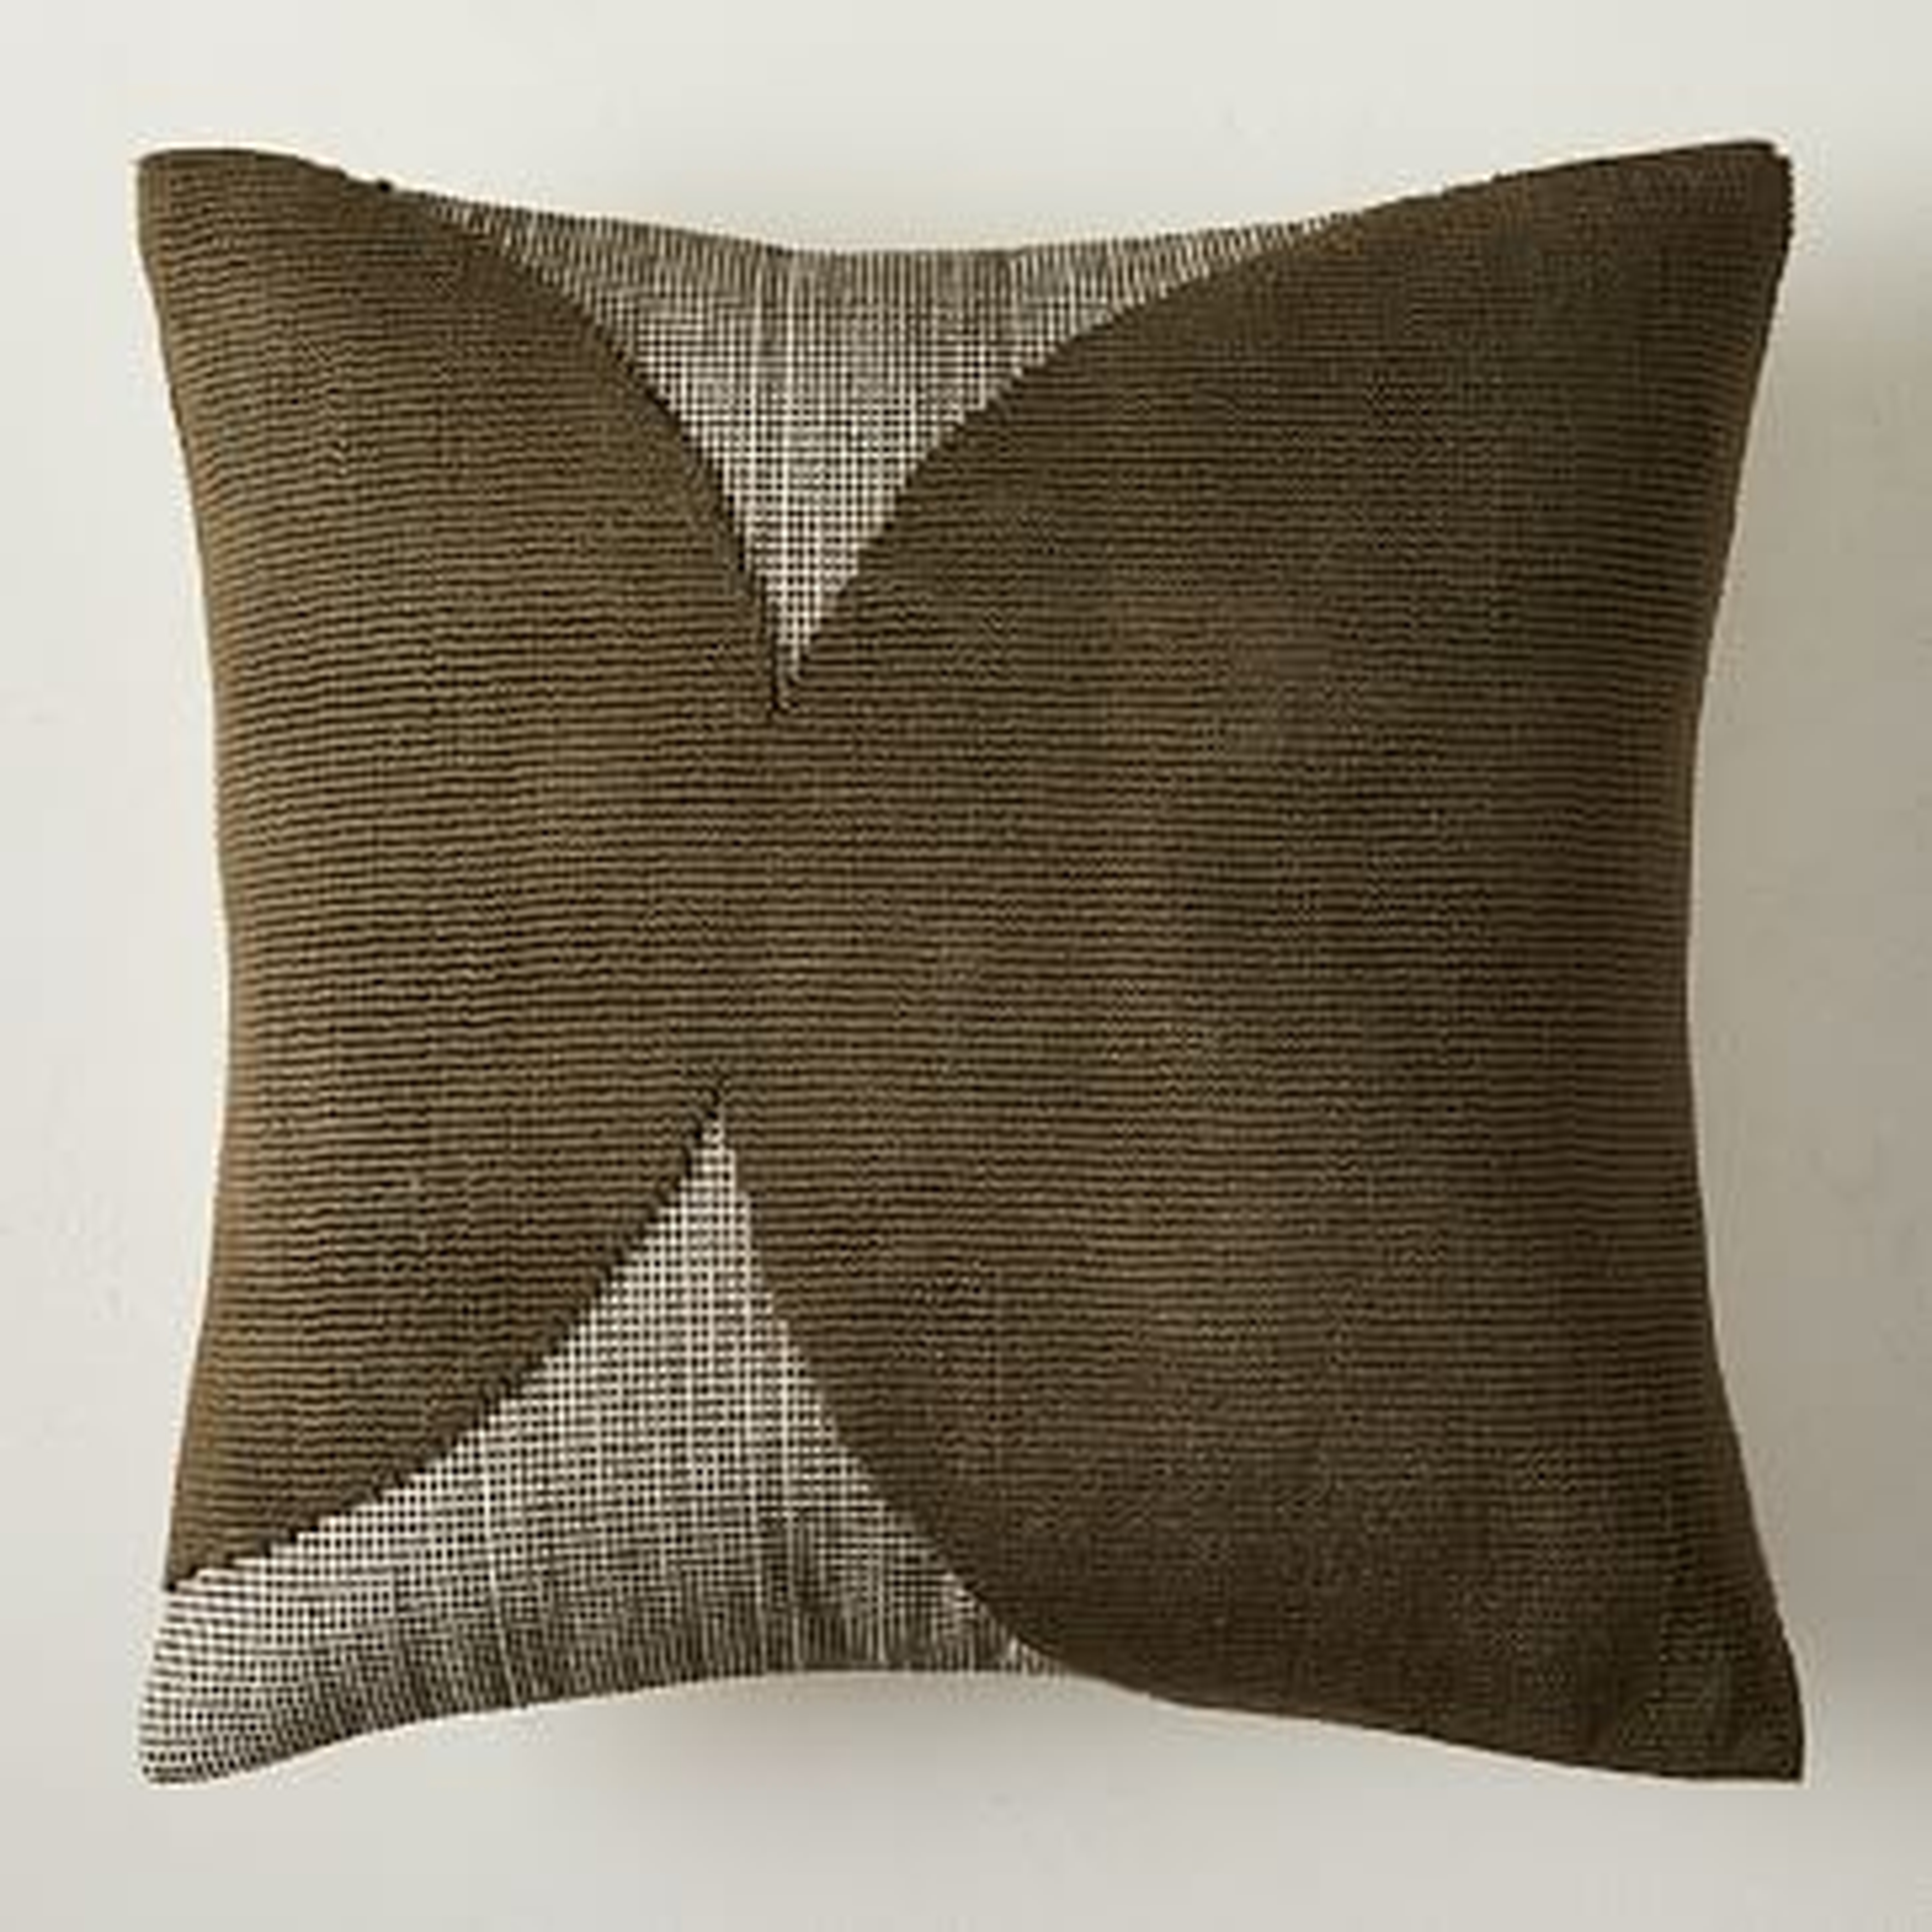 Loomed Loops Pillow Cover, Dark Olive, 20"x20" - West Elm